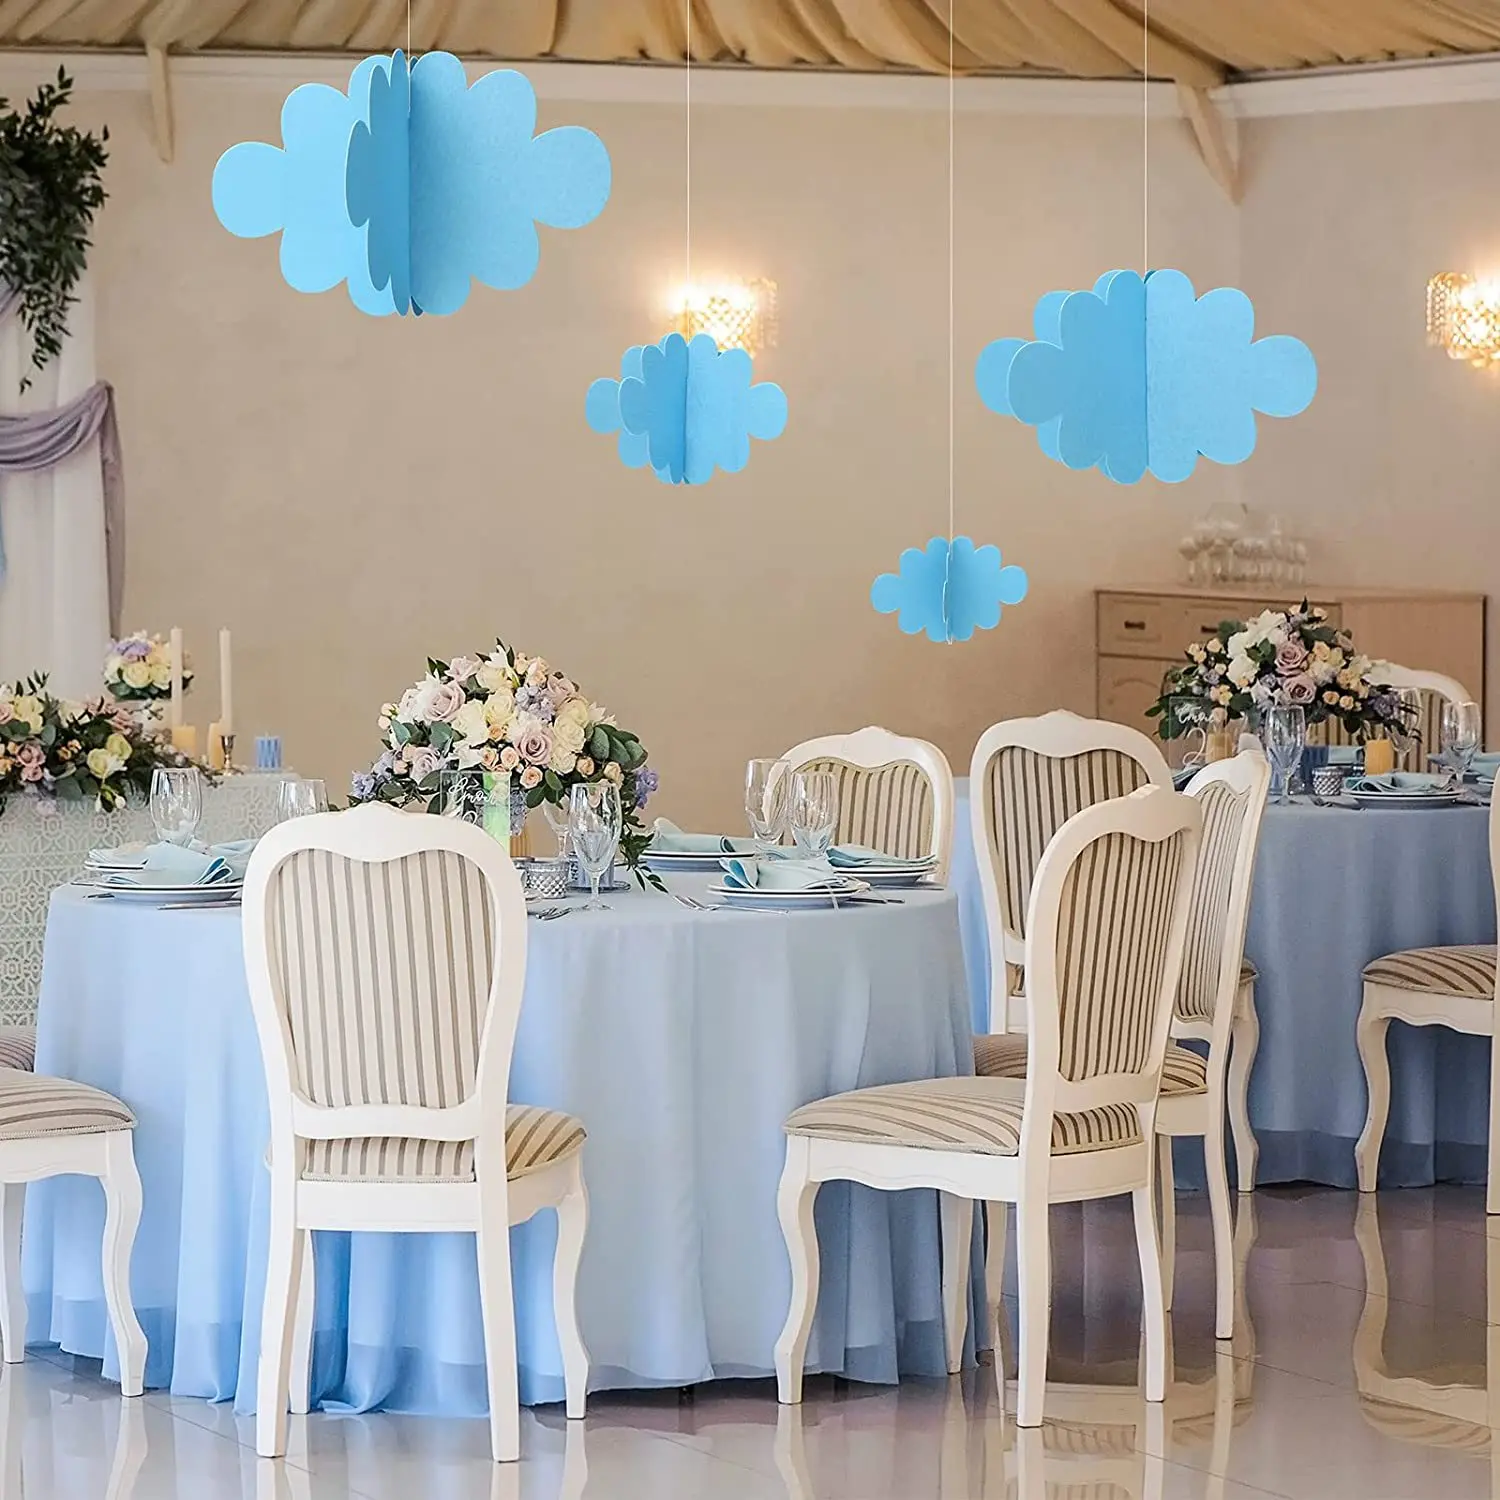 4 Pcs Simulated Cotton Cloud Photo Ornament Baby Shower Party Clould  Ceiling Clouds Bedroom Fake Wedding Kid Decor 3d - AliExpress